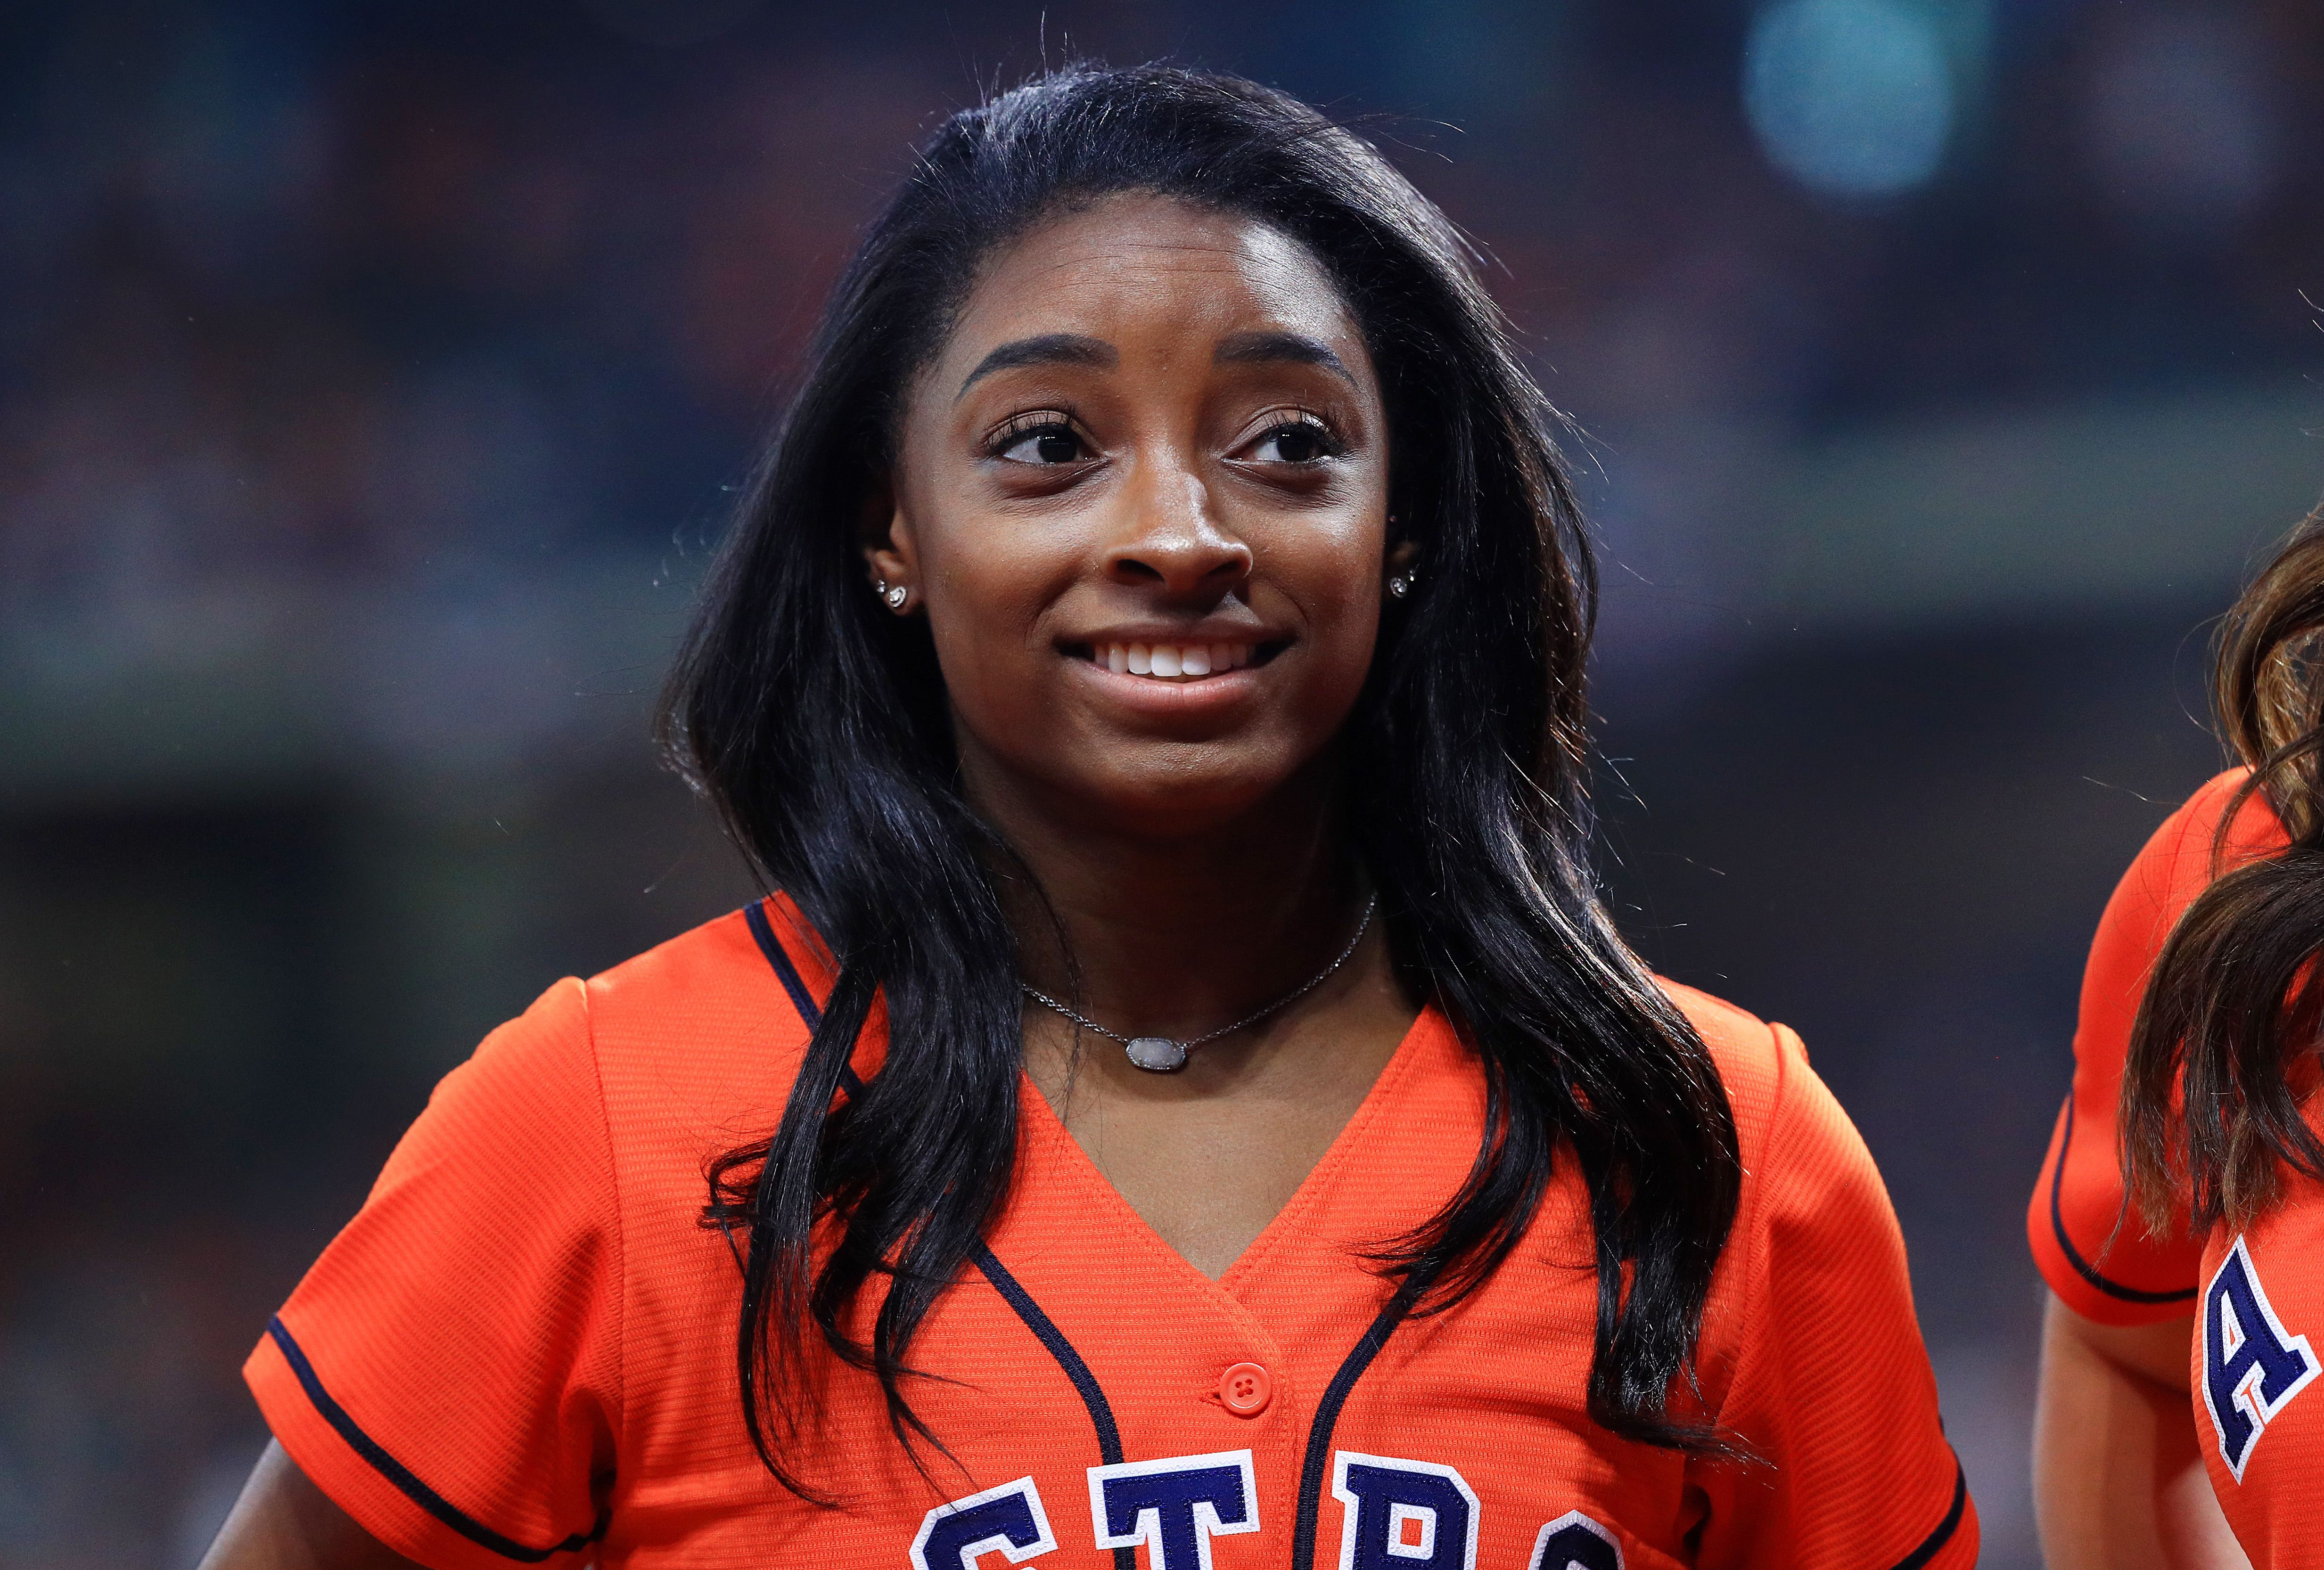 Simone Biles during the World Series game between the Houston Astros and the Washington Nationals on Oct. 23, 2019 in Texas. | Source: Getty Images